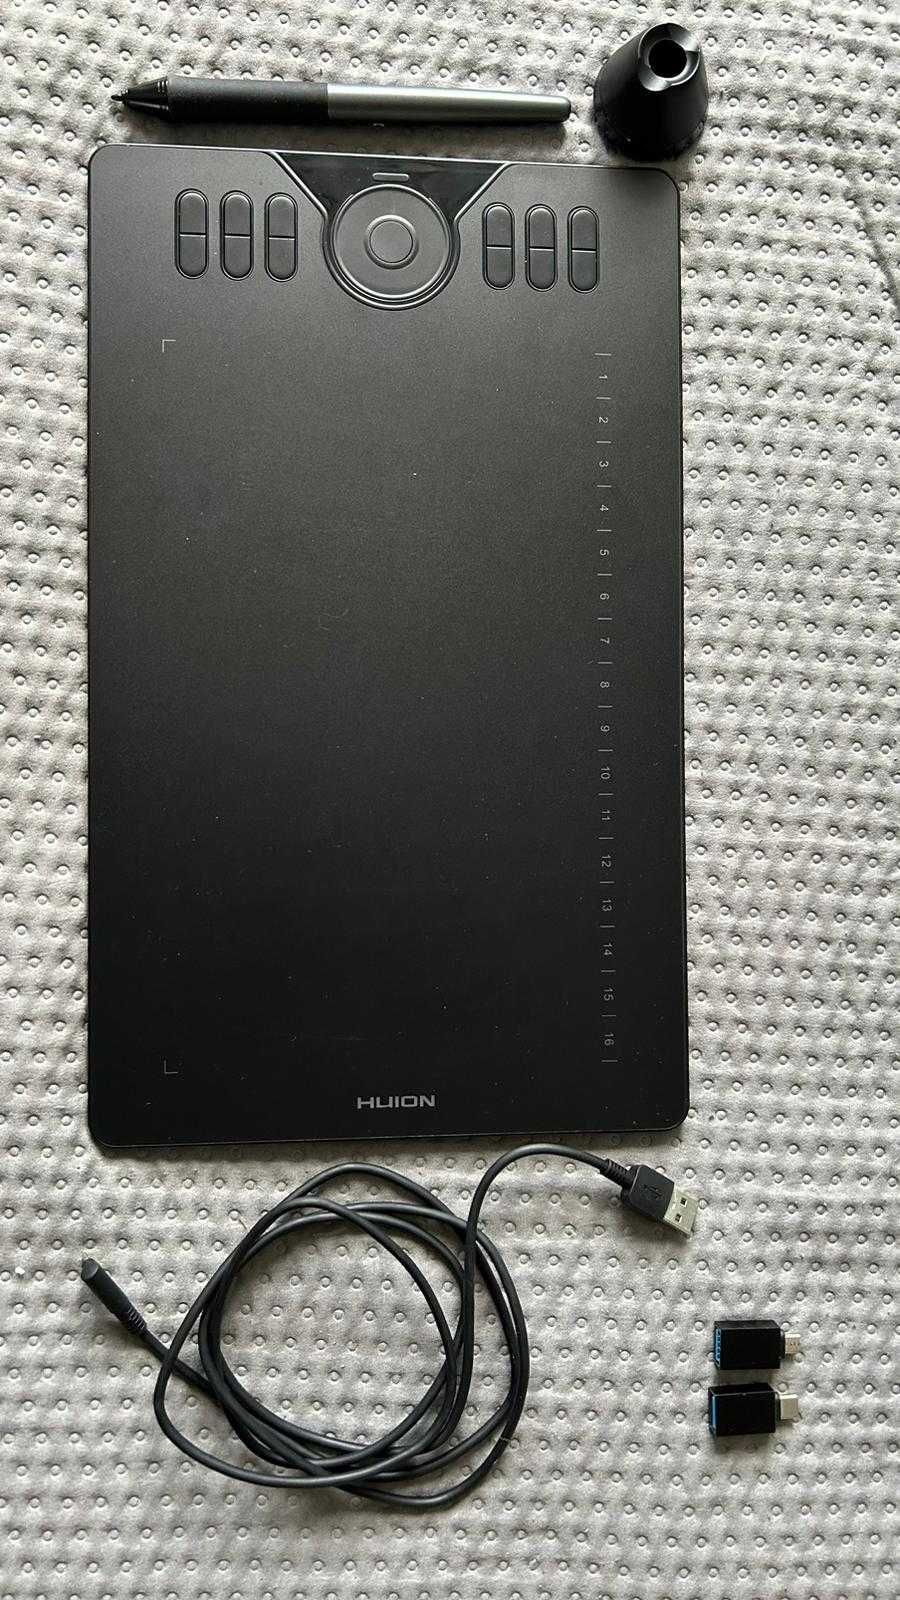 Tablet graficzny Huion HS610